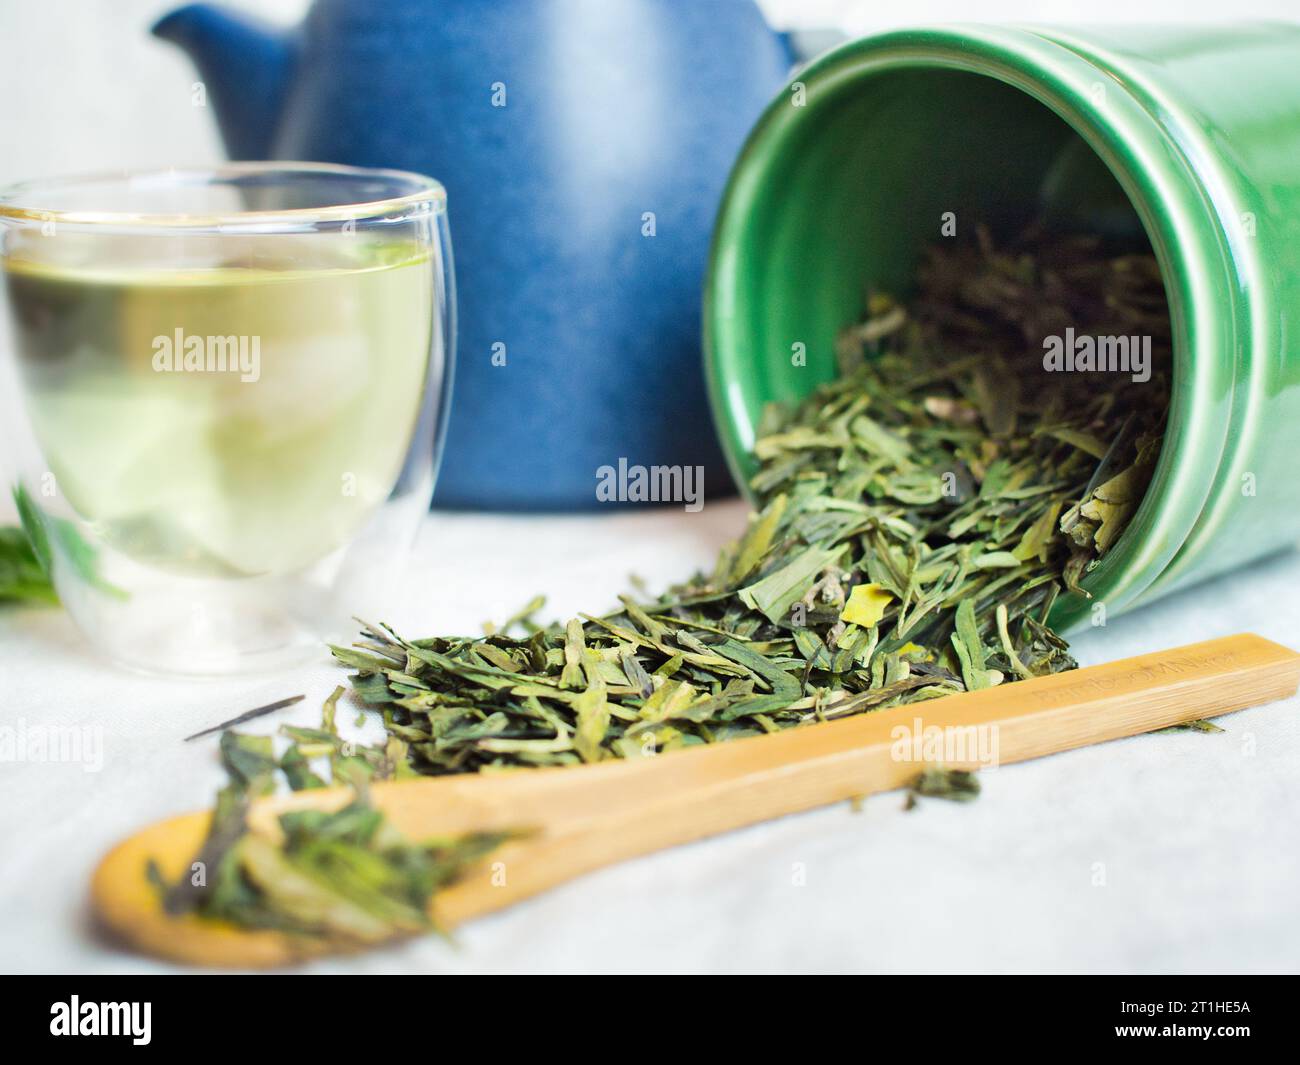 Still life of green tea long jing dragonwell from China. Tea leaves shown on linen table cloth with green tea in cup, teapot, and bamboo spoon. Stock Photo